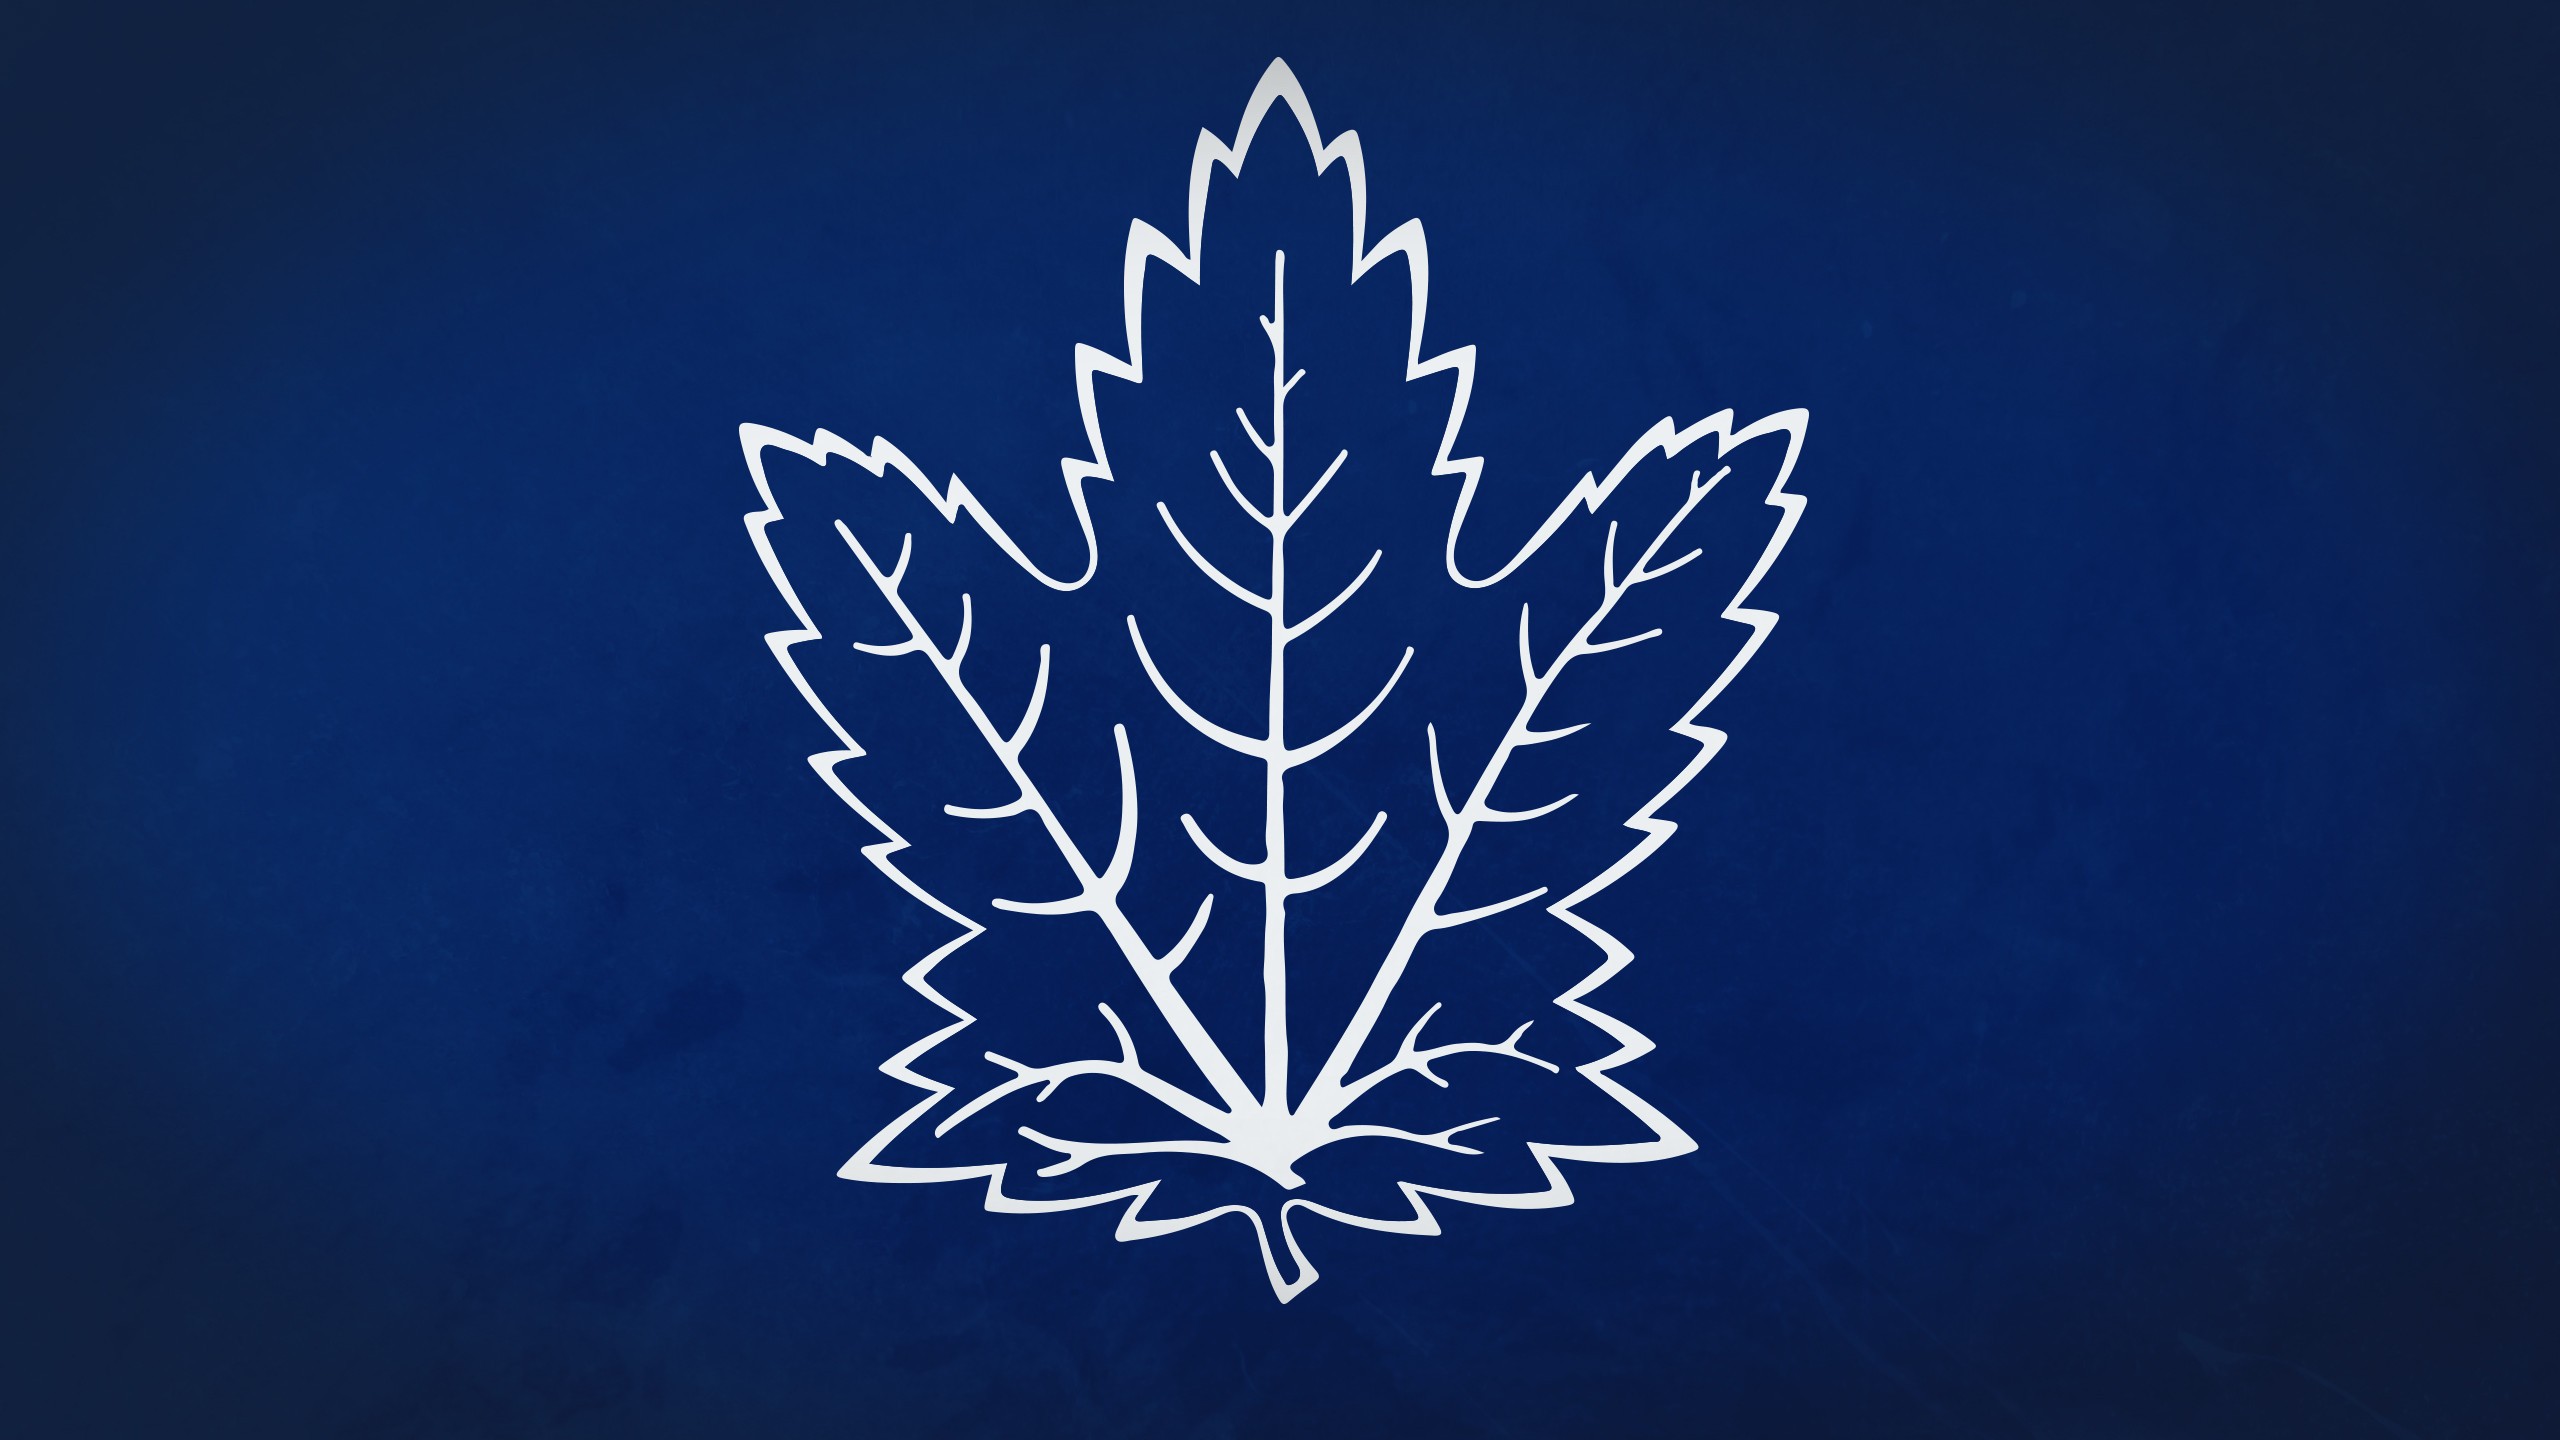 Toronto maple leafs Wallpapers - Free by ZEDGE™ | Toronto maple leafs  wallpaper, Toronto maple leafs, Maple leafs wallpaper